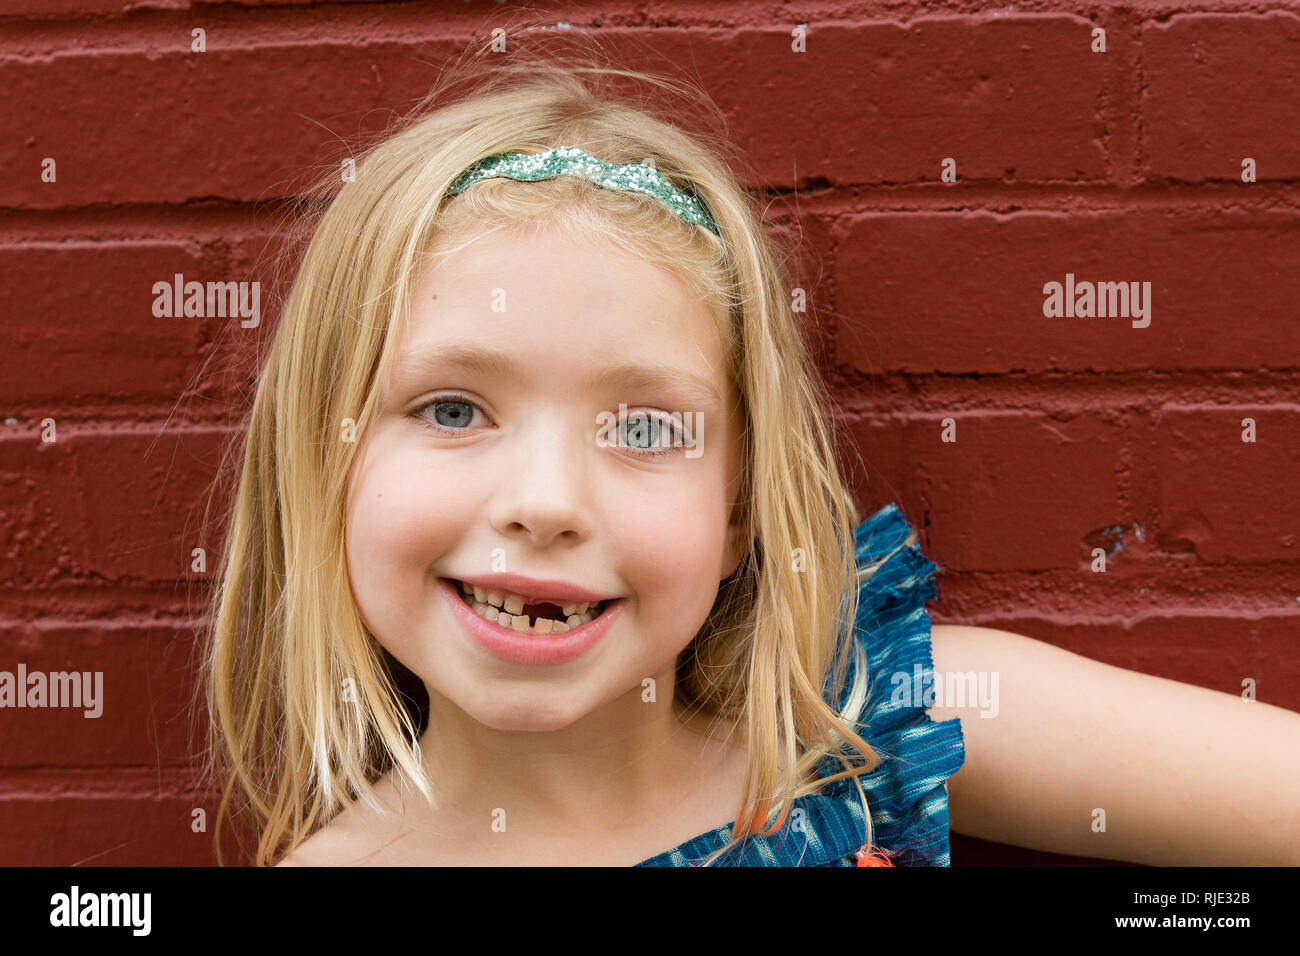 Young school age girl missing front tooth Stock Photo